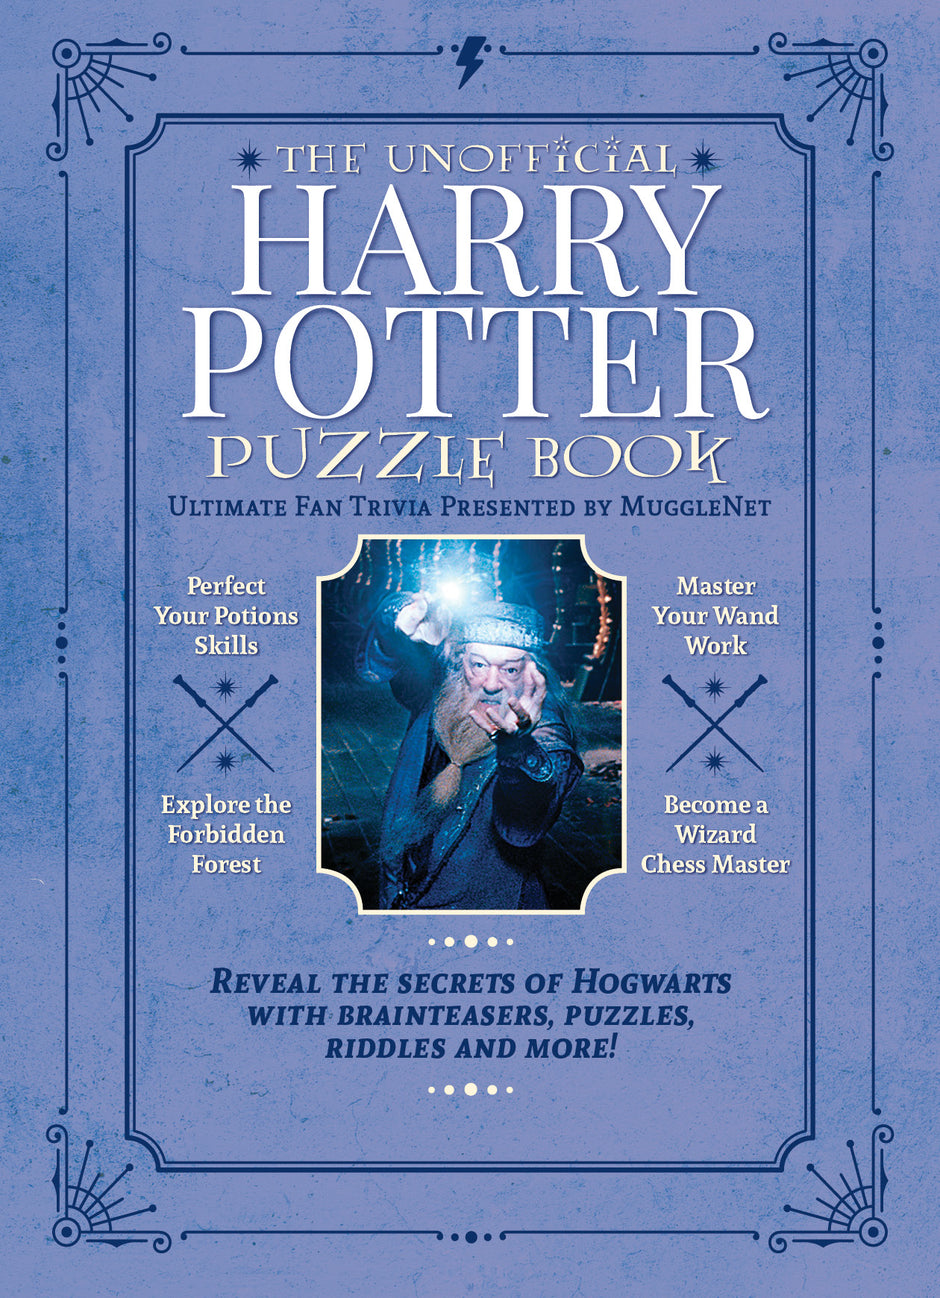 “The Unofficial Harry Potter Puzzle Book”